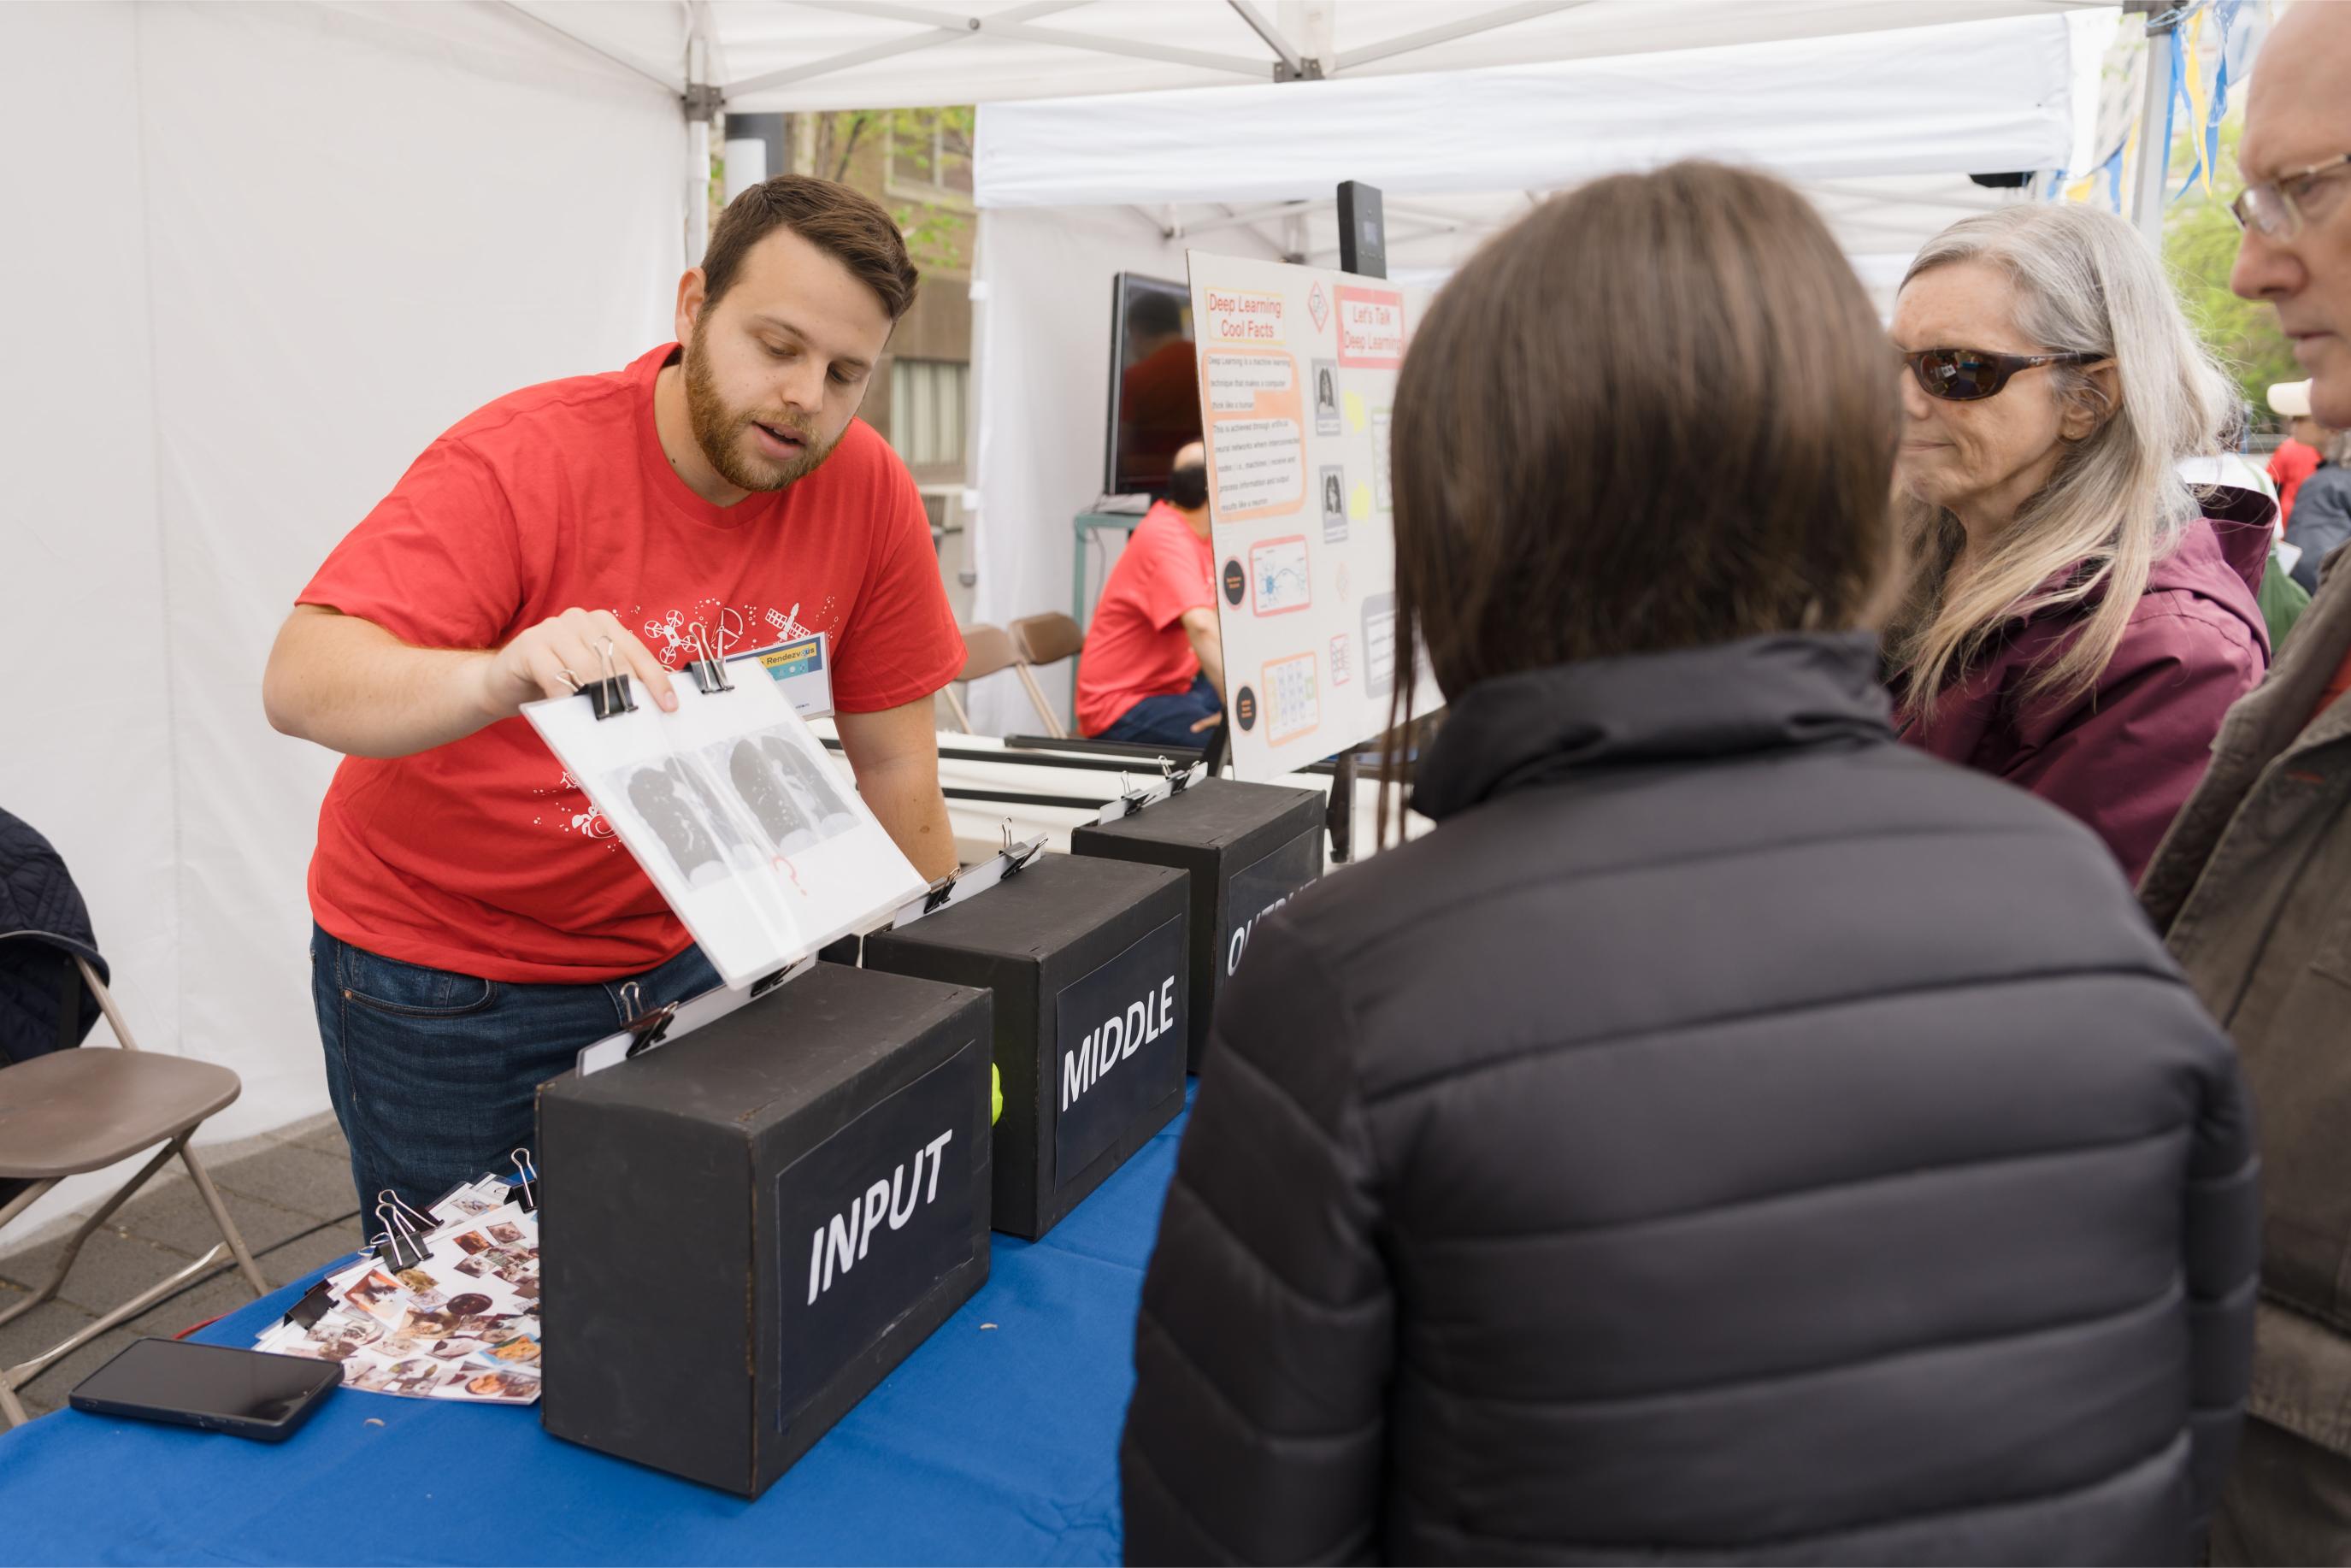 A volunteer showing photos of lung X-rays to three participants at the Deep Learning Booth.